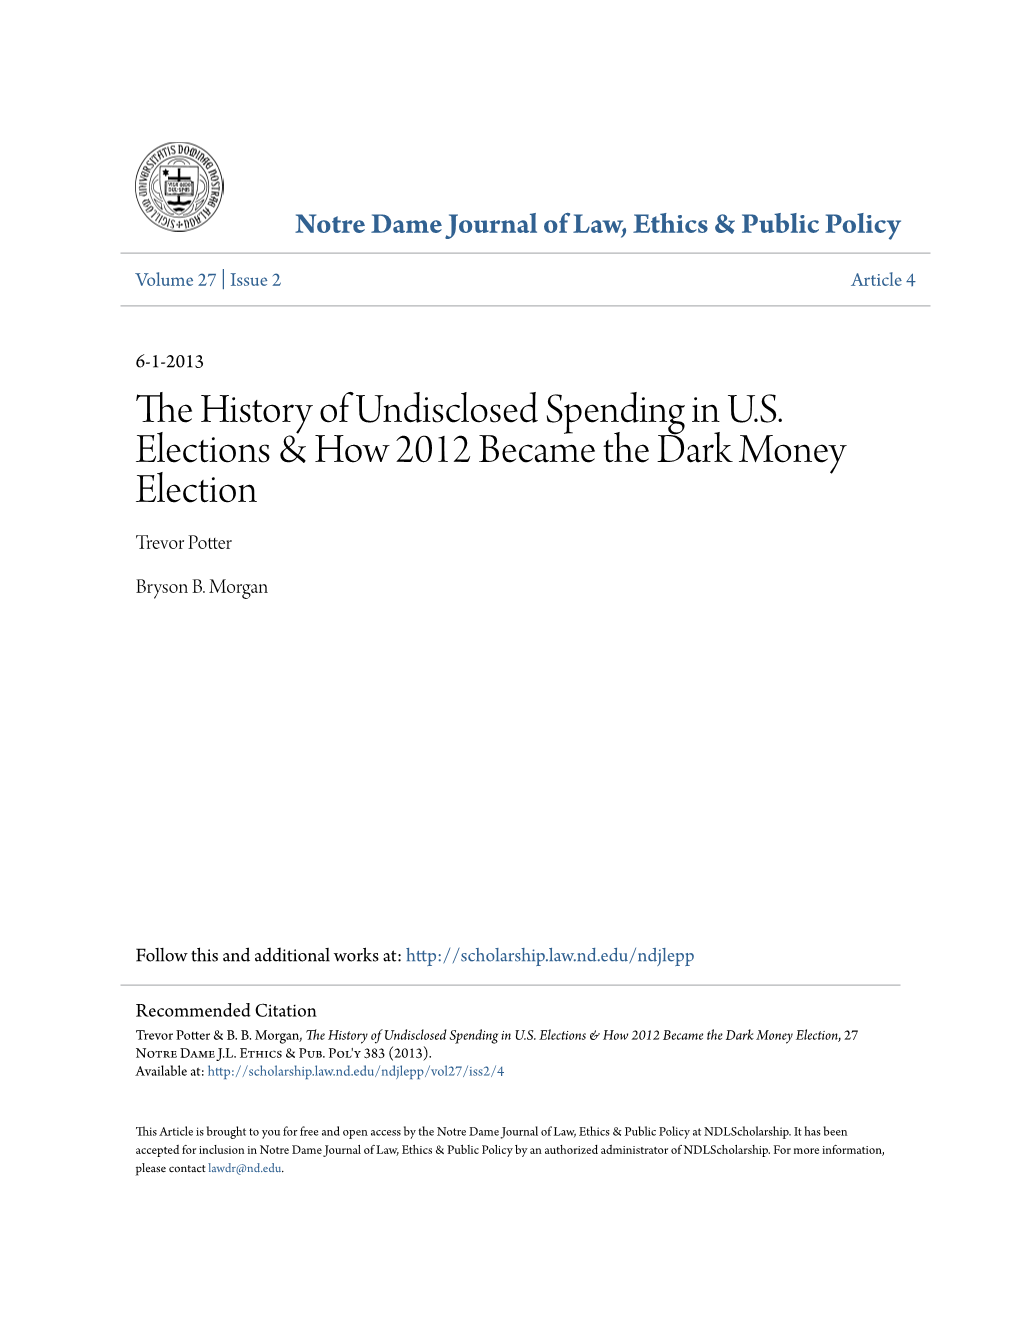 The History of Undisclosed Spending in U.S. Elections & How 2012 Became the Dark Money Election